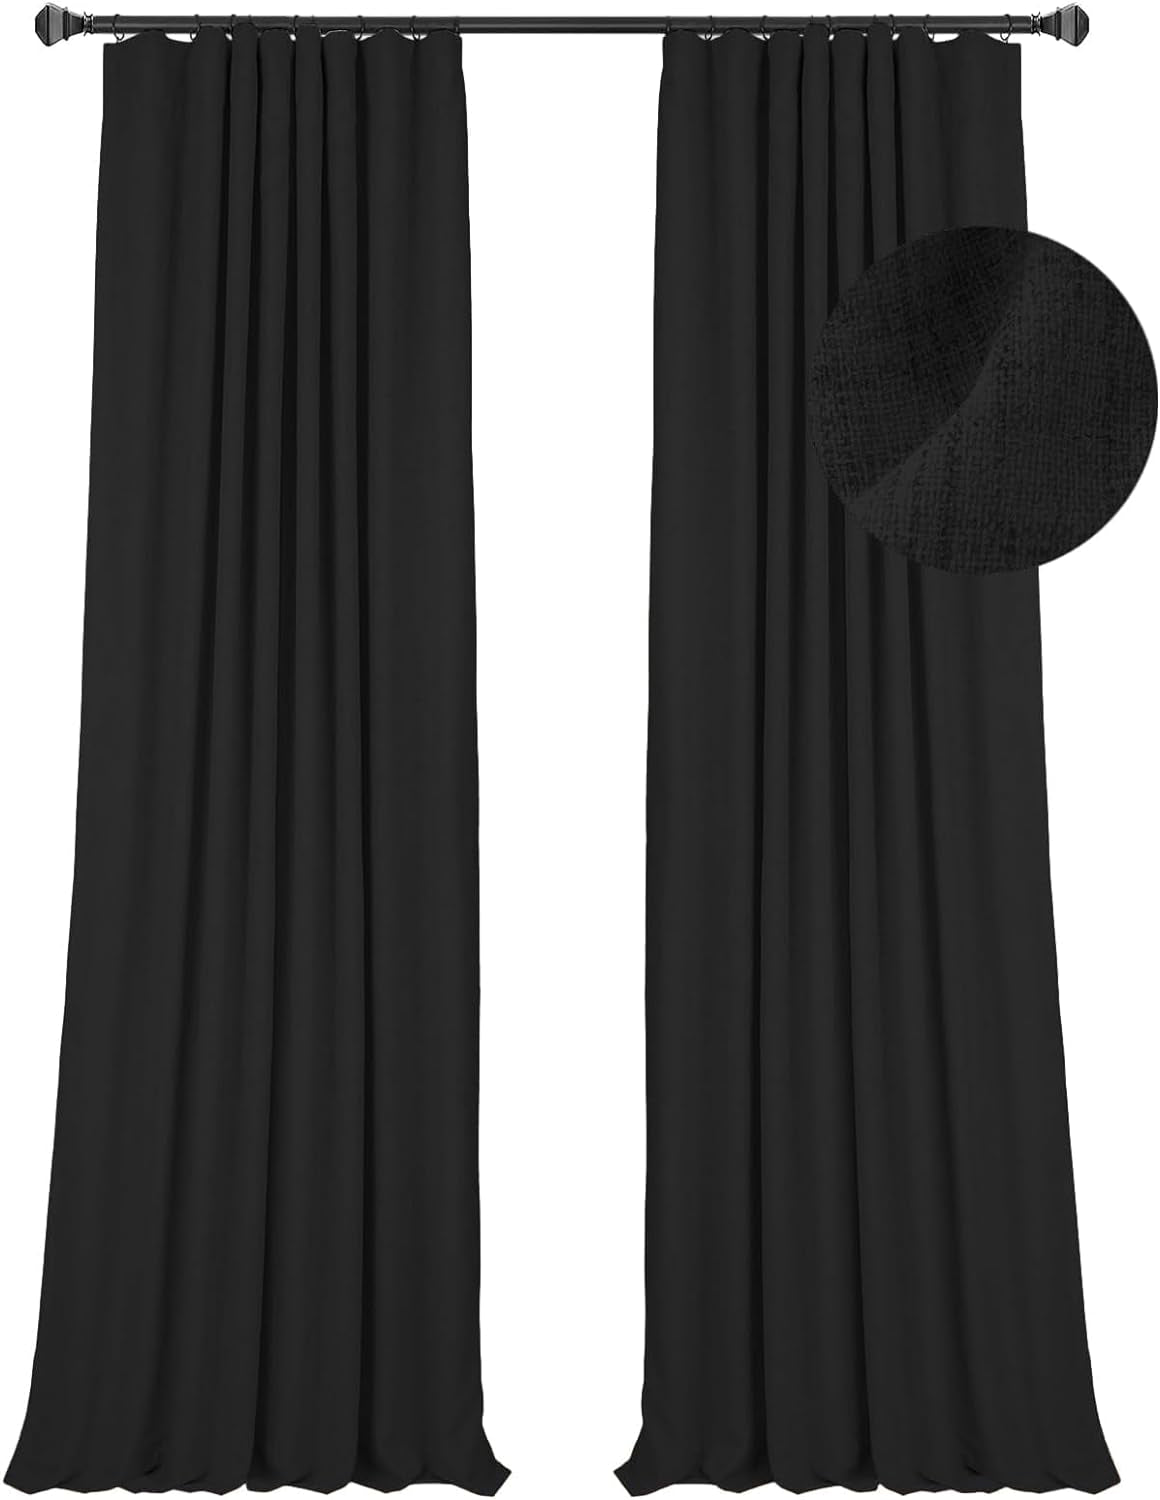 Zeerobee 100% Black Out Curtains for Bedroom Windows 84 Linen Blackout Curtains 84 Inch Length 2 Panels Set, Thermal Insulated Black Out Curtains & Drapes, W50 X L84, Beige  zeerobee 26 Black 50"W X 108"L 